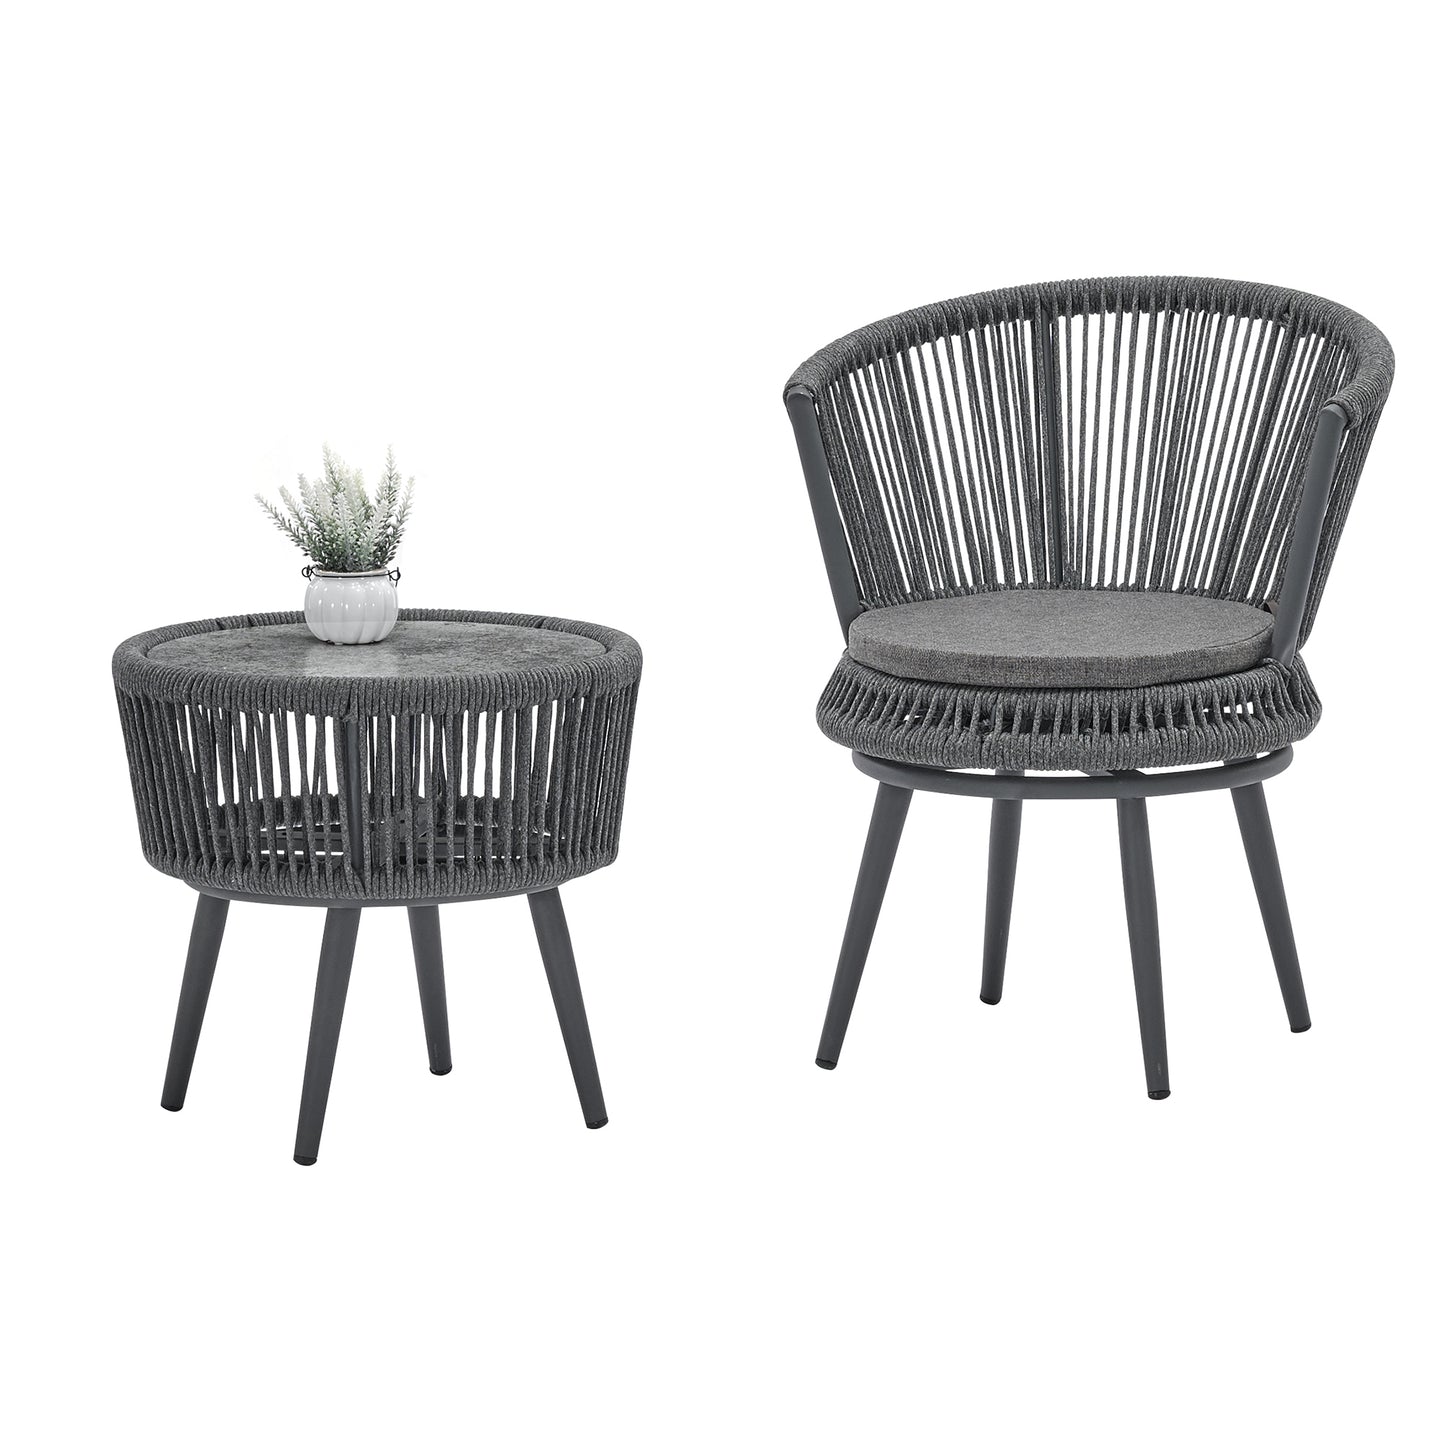 Modern Outdoor Table & Chairs -3 pcs.